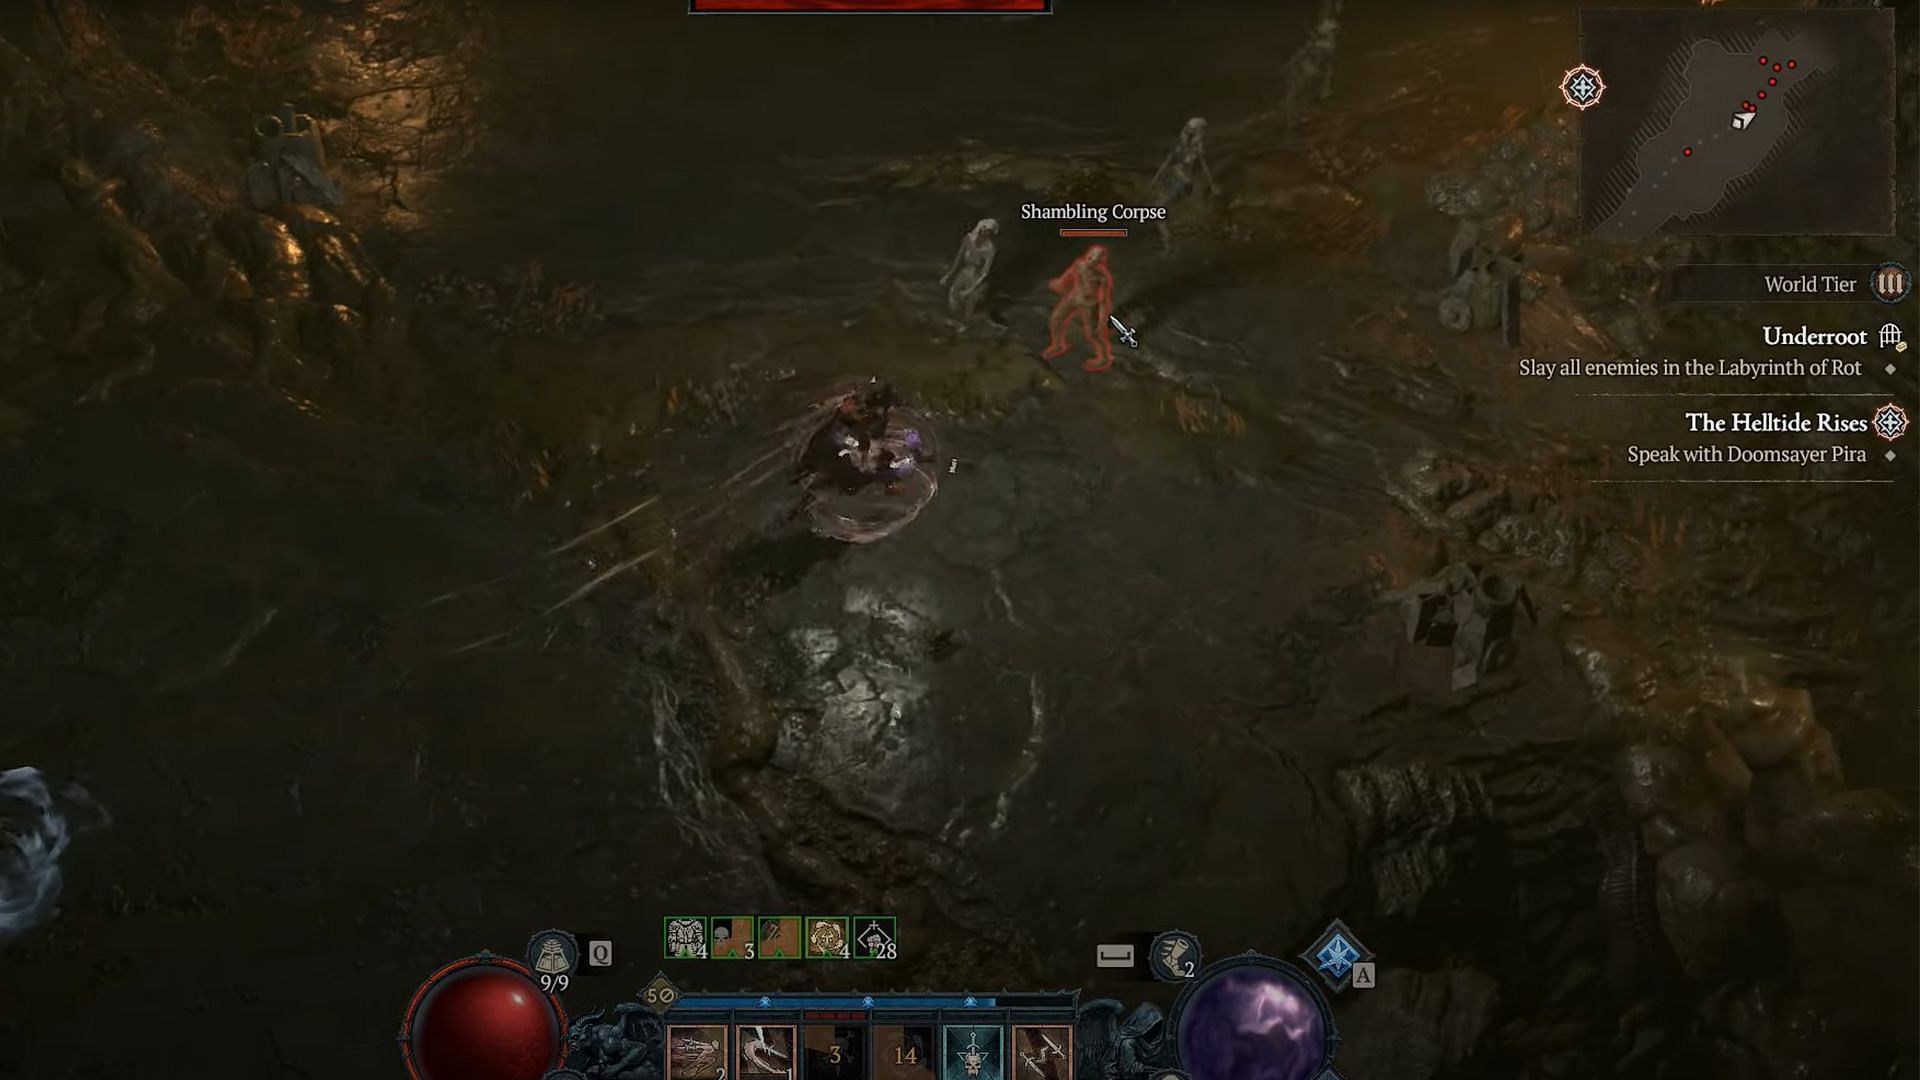 Labyrinth of Rot in the Underroot Dungeon in Diablo 4 (Image via Blizzard Entertainment)